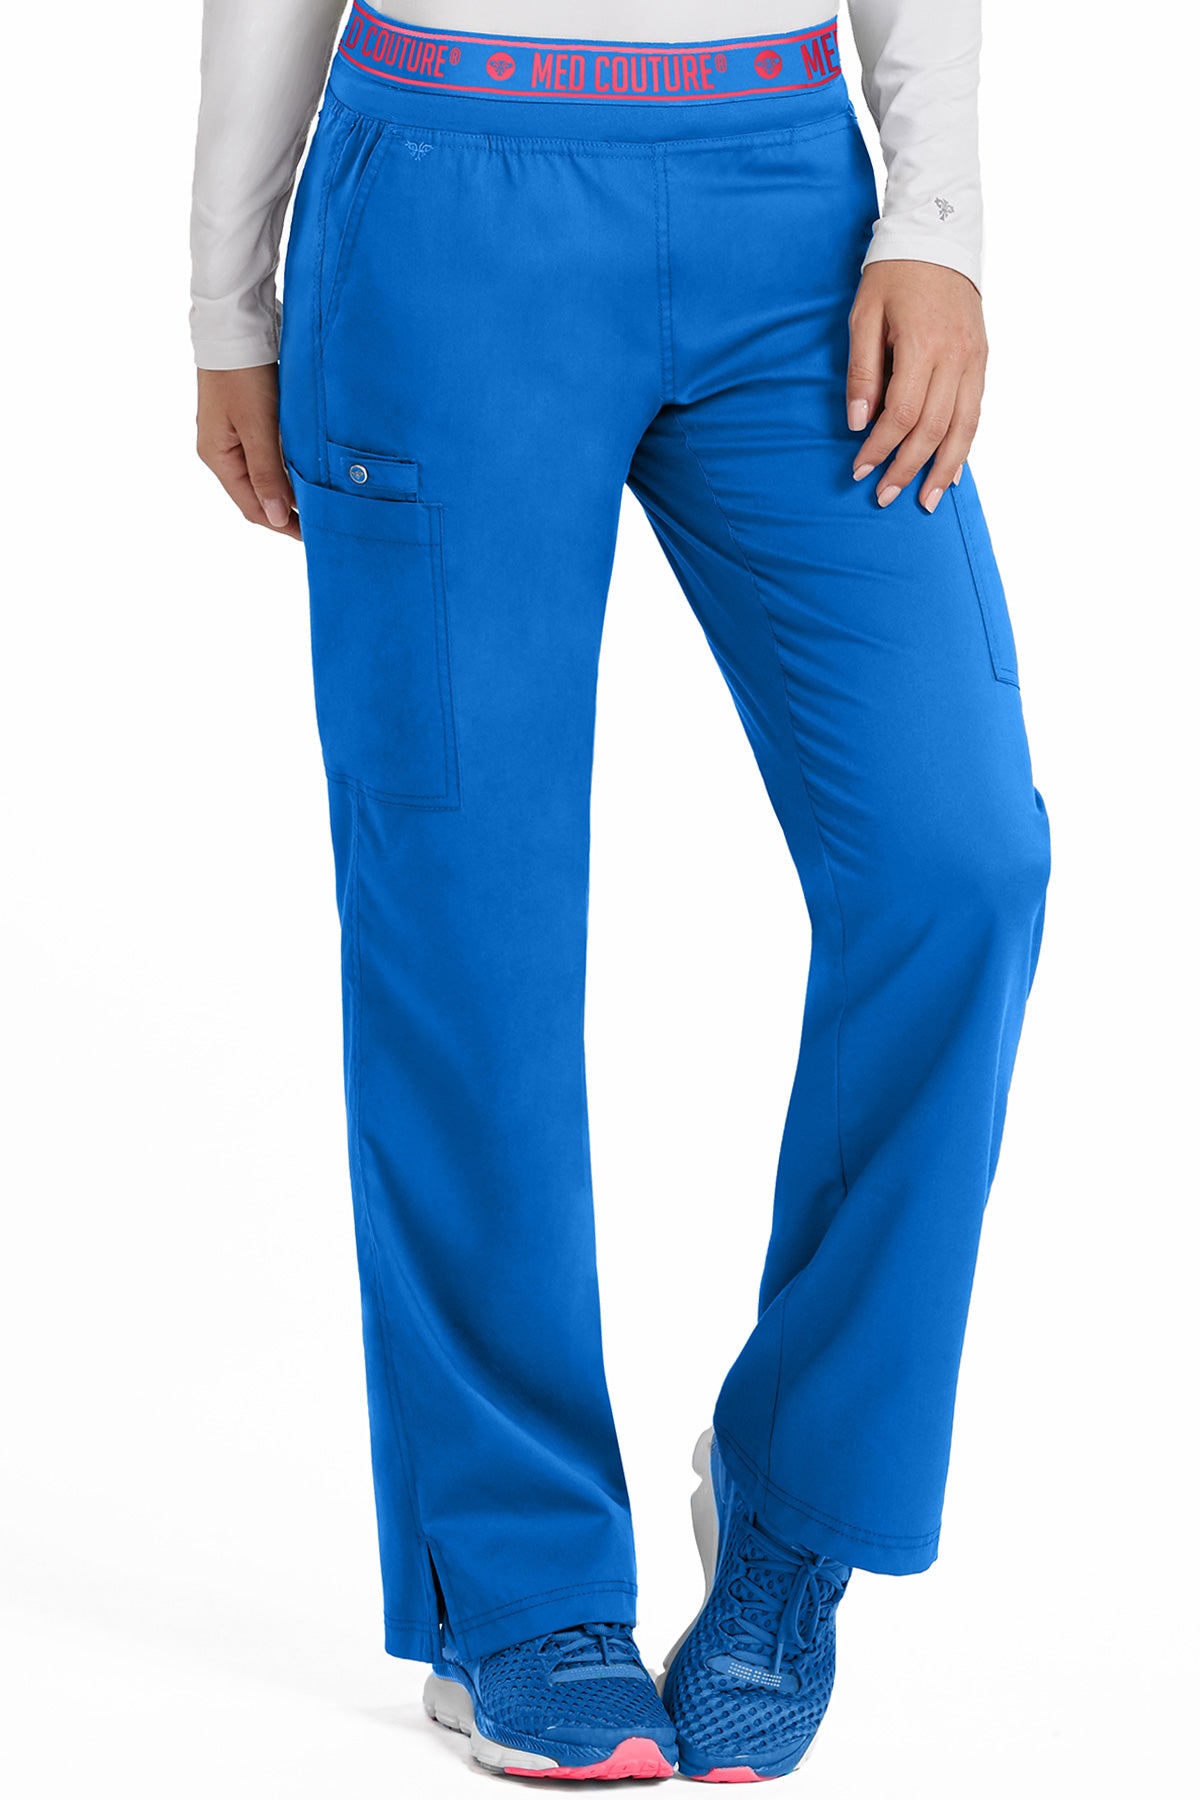 Med Couture Scrub Pants Touch Ally Yoga Pant in Royal at Parker's Clothing and Shoes.